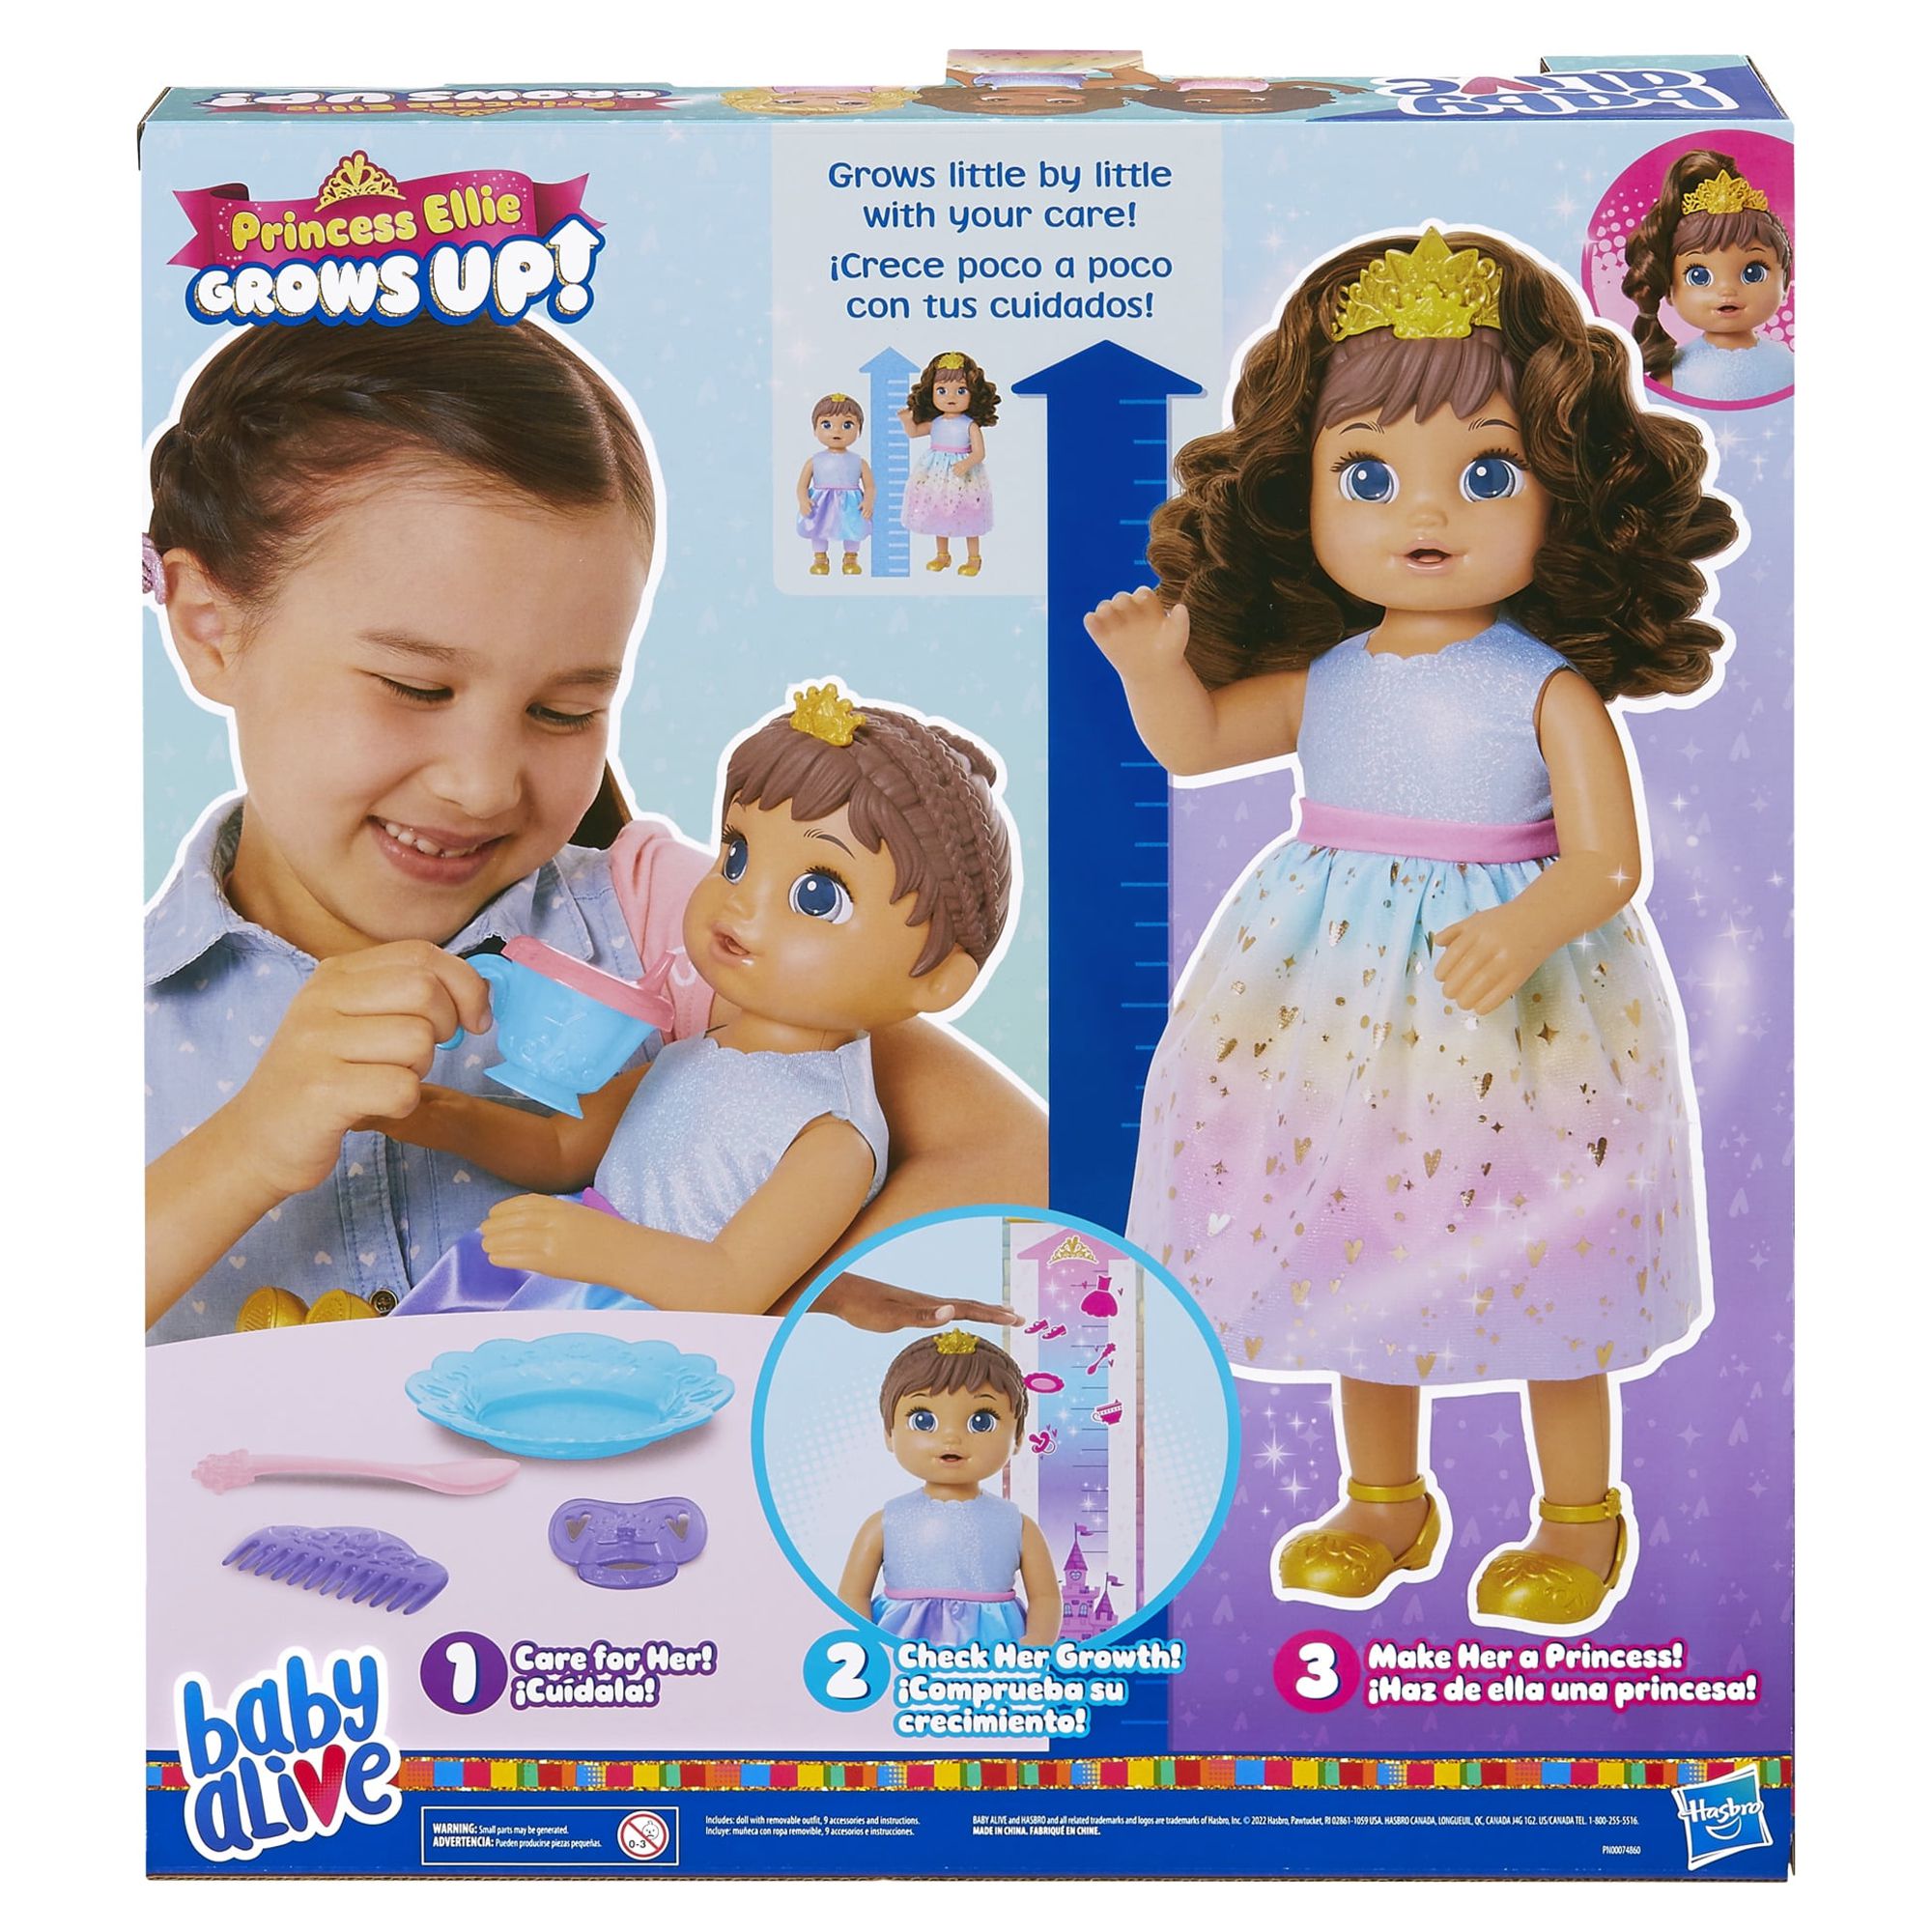 Baby Alive: Princess Ellie Grows Up! 15-Inch Doll Brown Hair, Brown Eyes Kids Toy for Boys and Girls - image 5 of 13